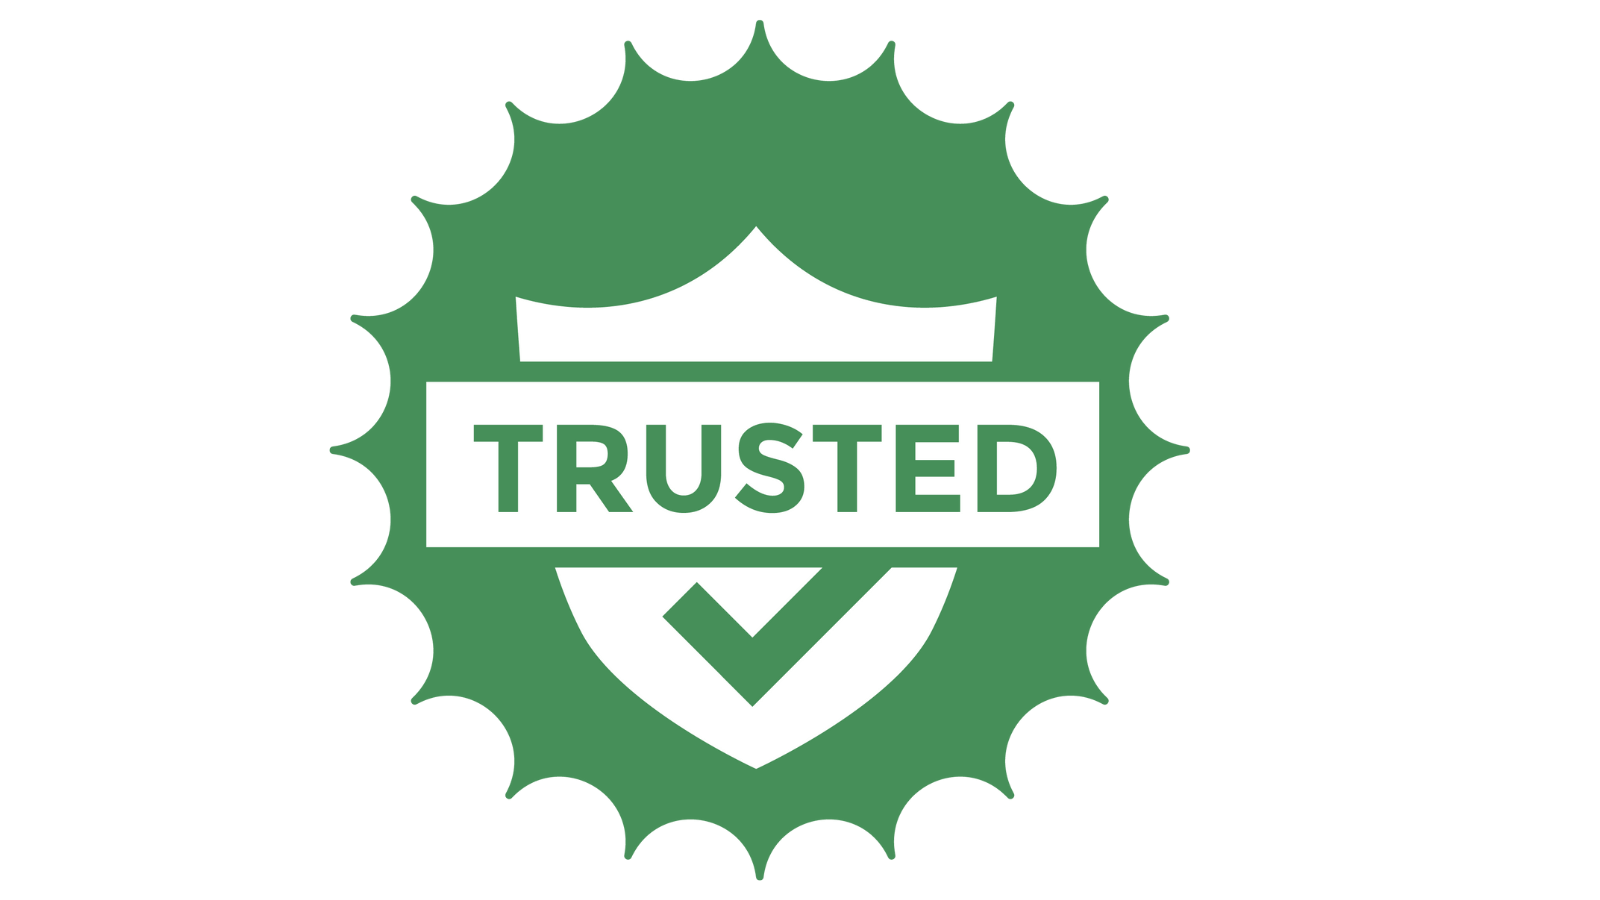 A badge that says TRUSTED